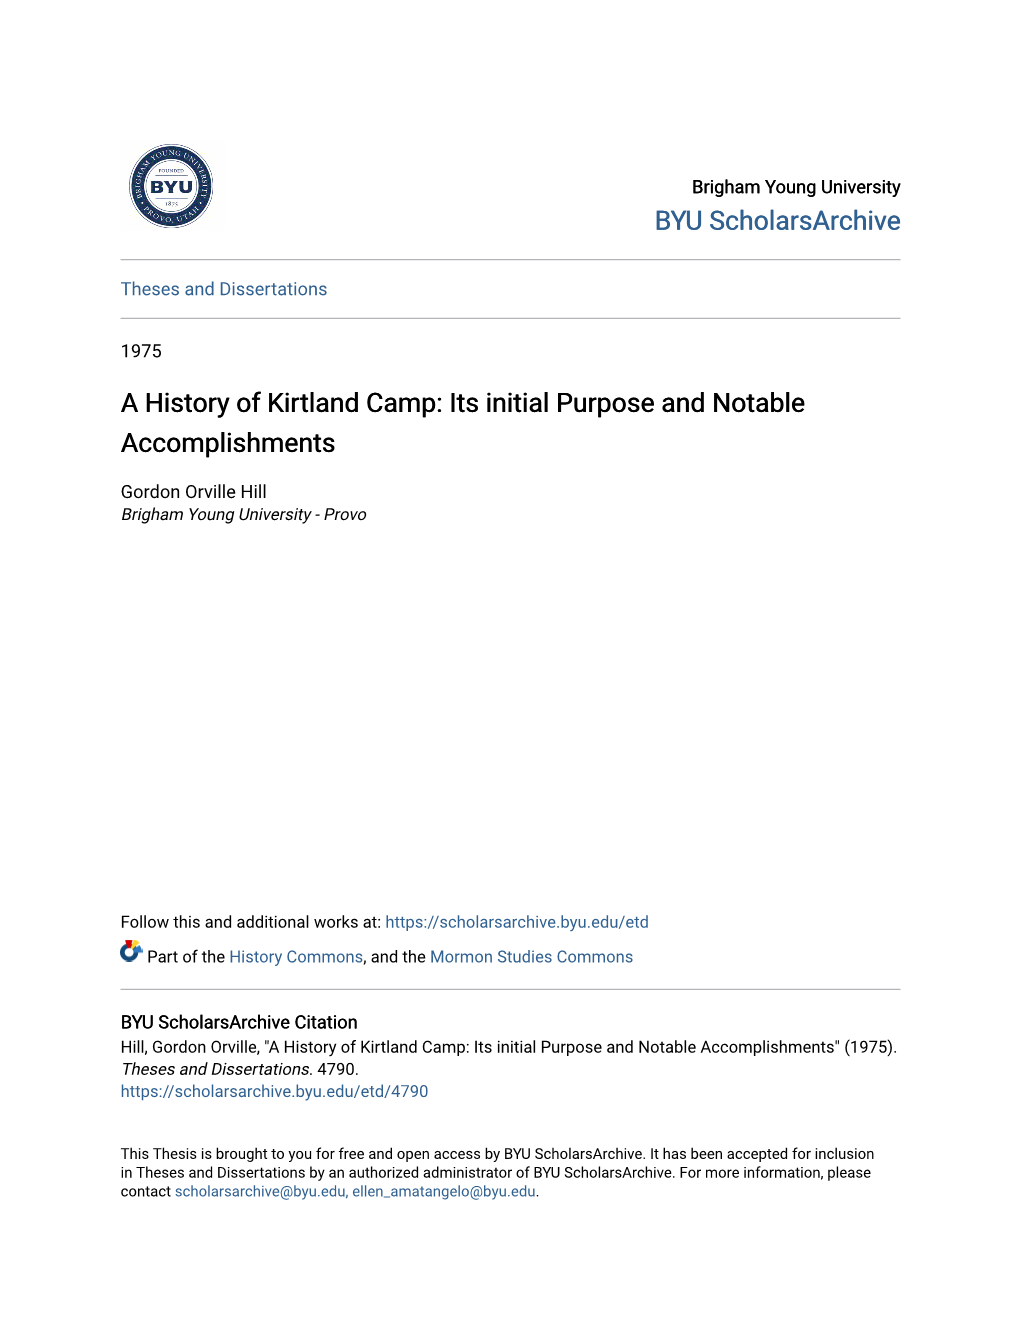 A History of Kirtland Camp: Its Initial Purpose and Notable Accomplishments